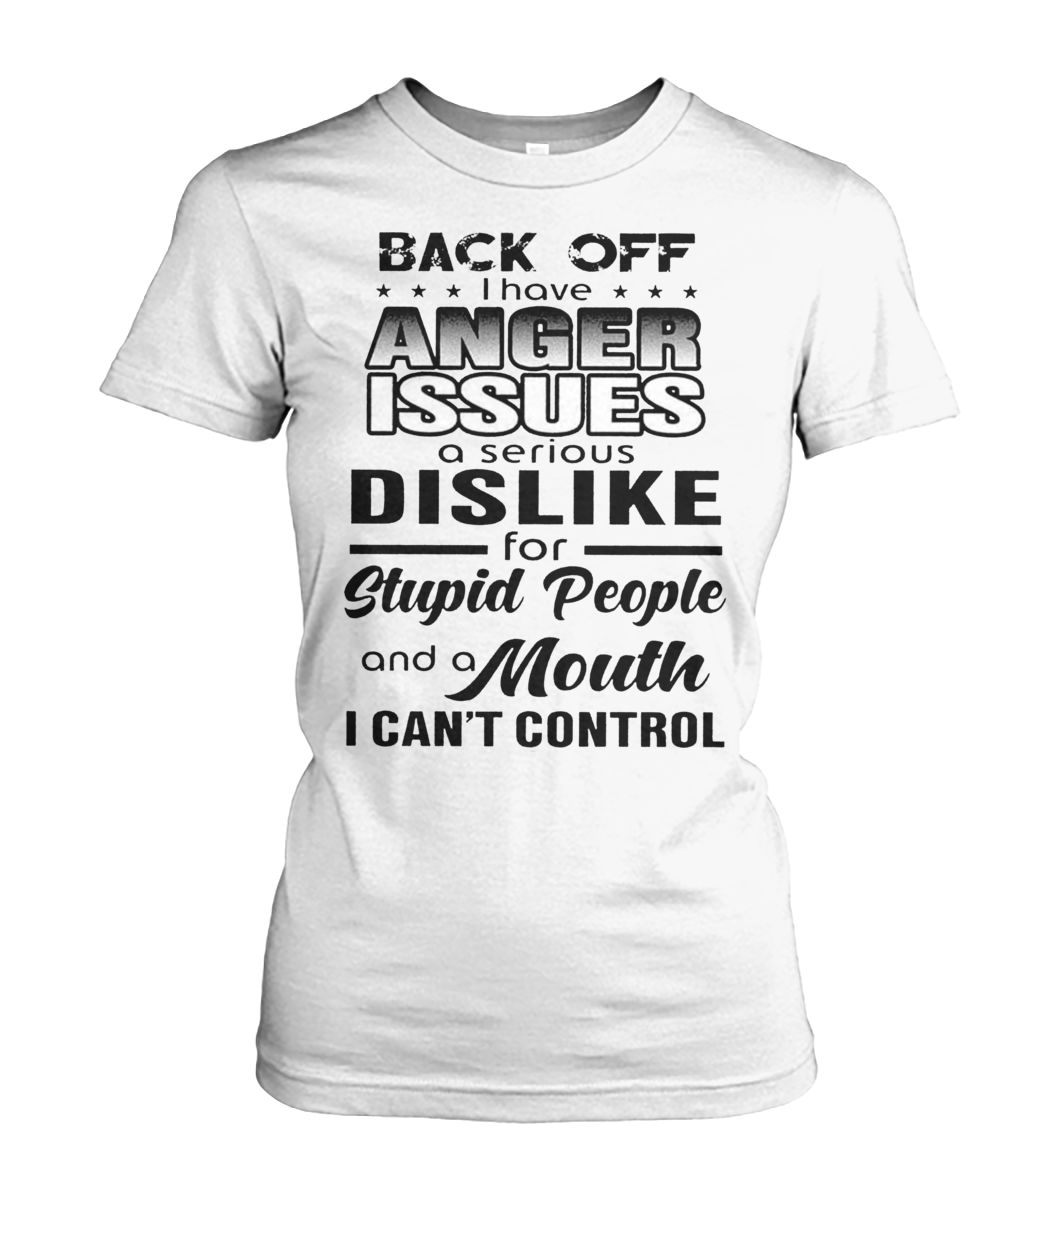 Back off I have a anger issues and serious dislike for stupid people women's crew tee